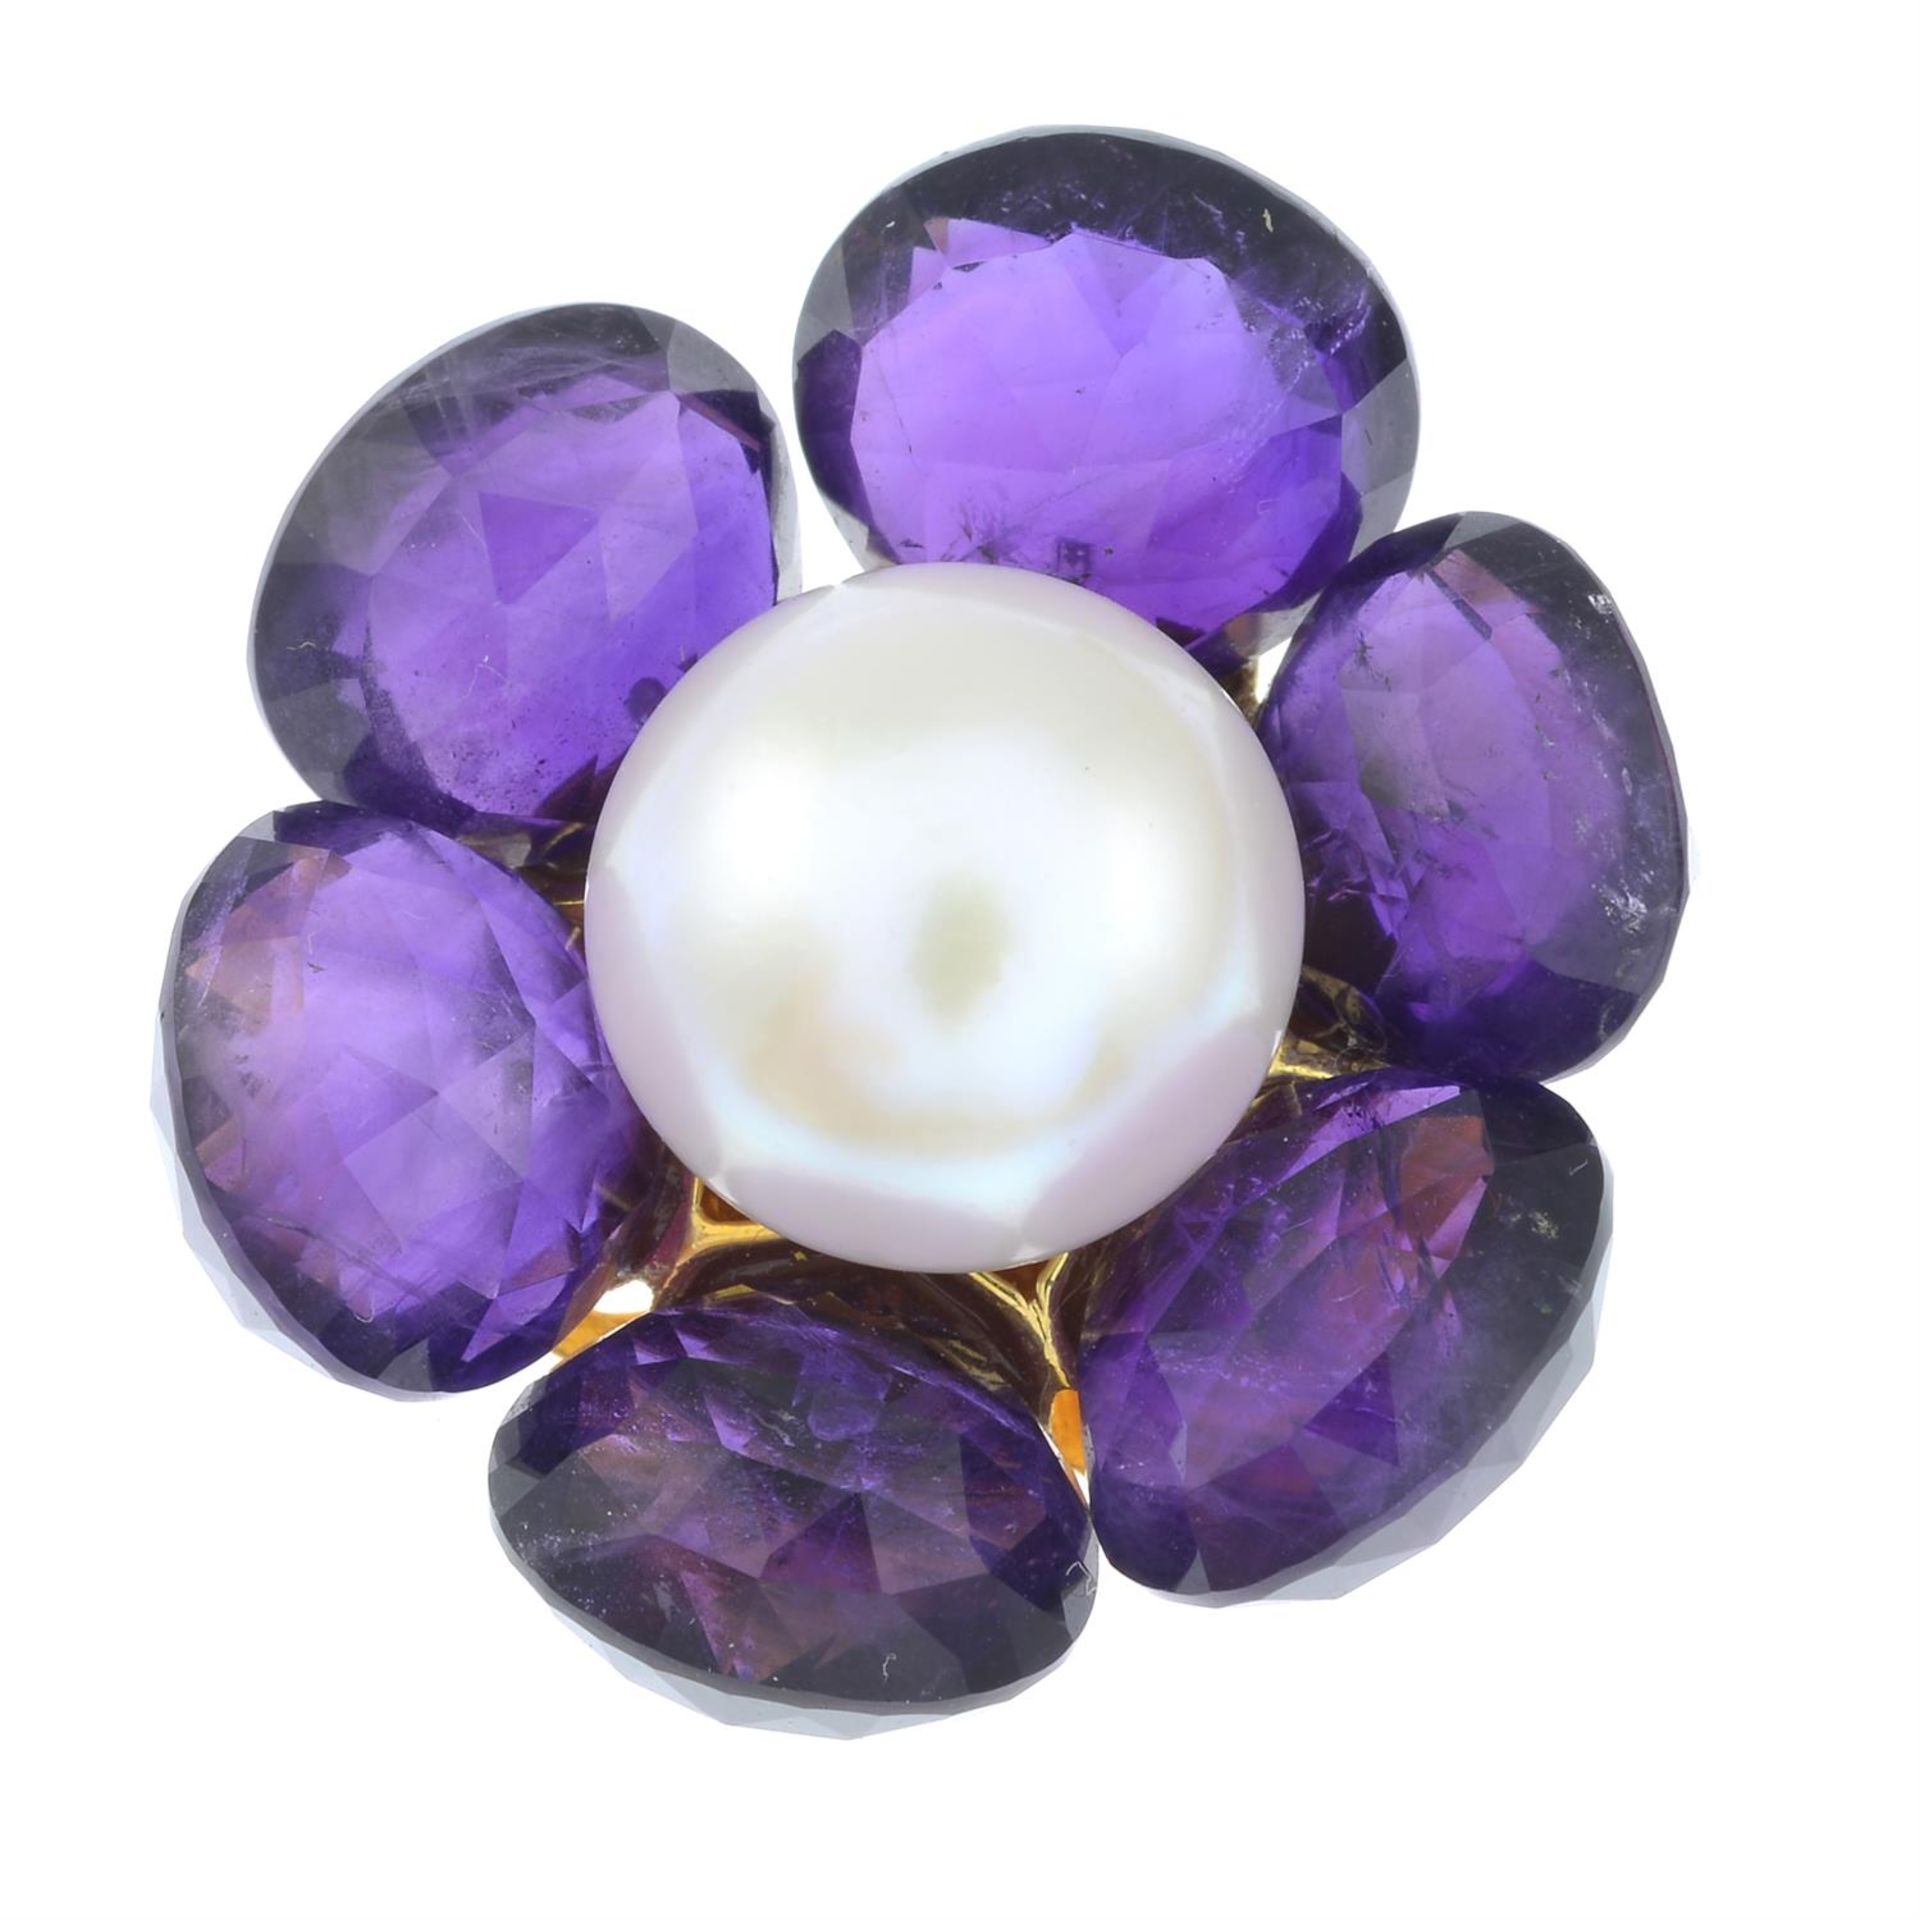 A cultured pearl and amethyst floral pendant.